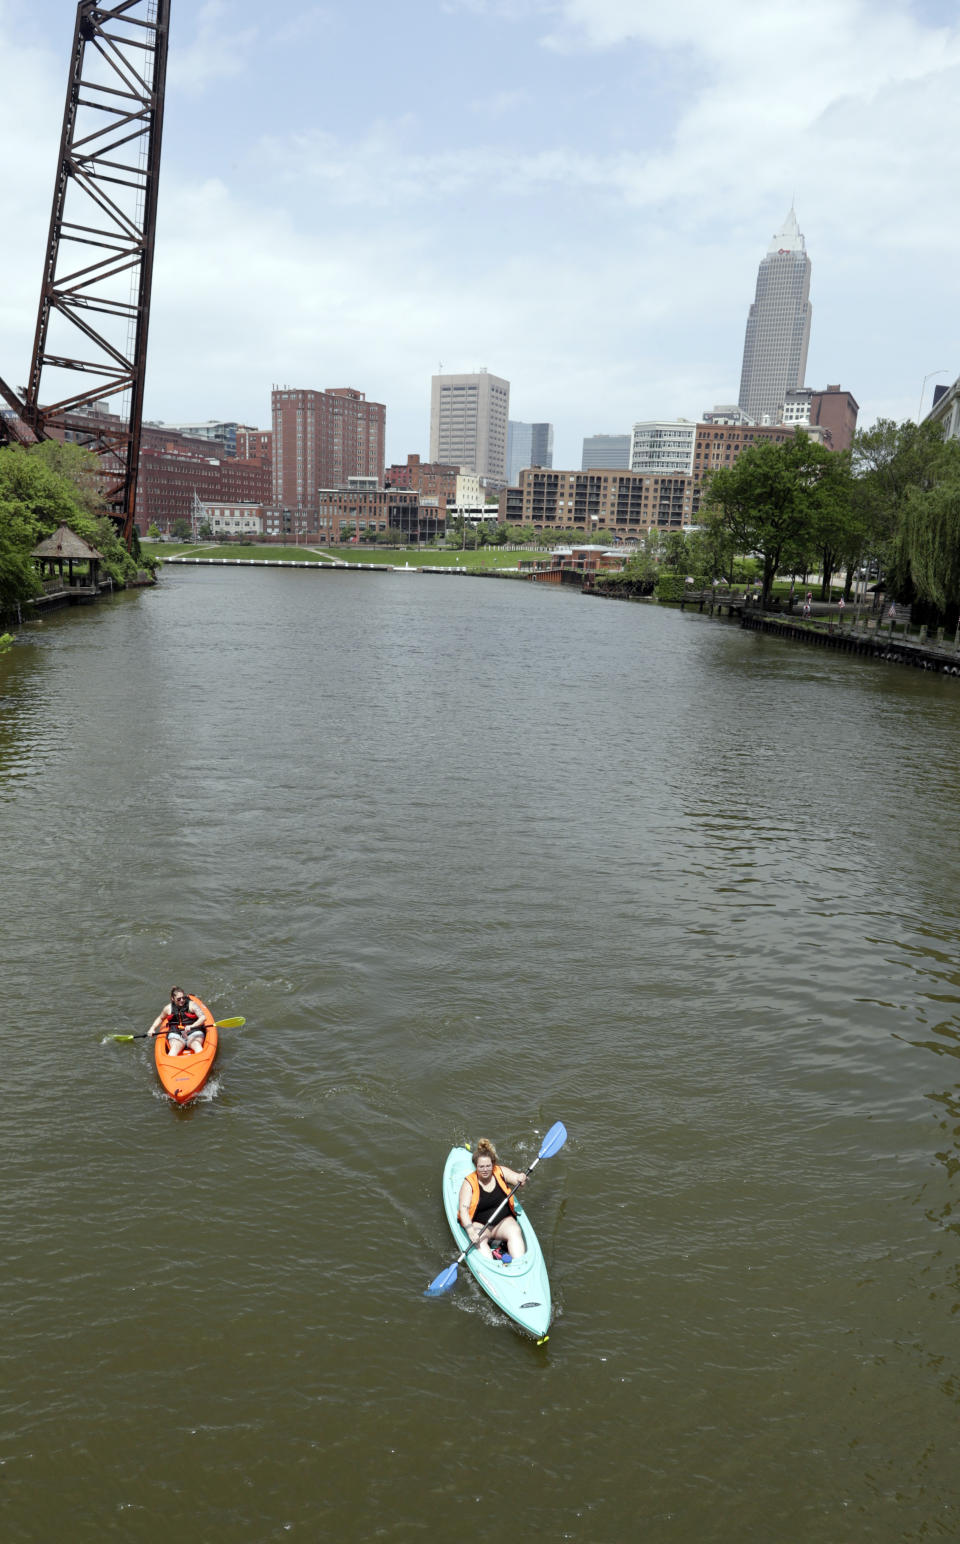 Kylie Augustine, left, and Ashlie Prosky paddle in kayaks on the Cuyahoga River, Tuesday, May 28, 2019, in Cleveland. Fifty years after the Cuyahoga River's famous fire, a plucky new generation of Cleveland artists and entrepreneurs has turned the old jokes about the “mistake on the lake” into inspiration and forged the decades of embarrassment into a fiery brand of local pride. (AP Photo/Tony Dejak)